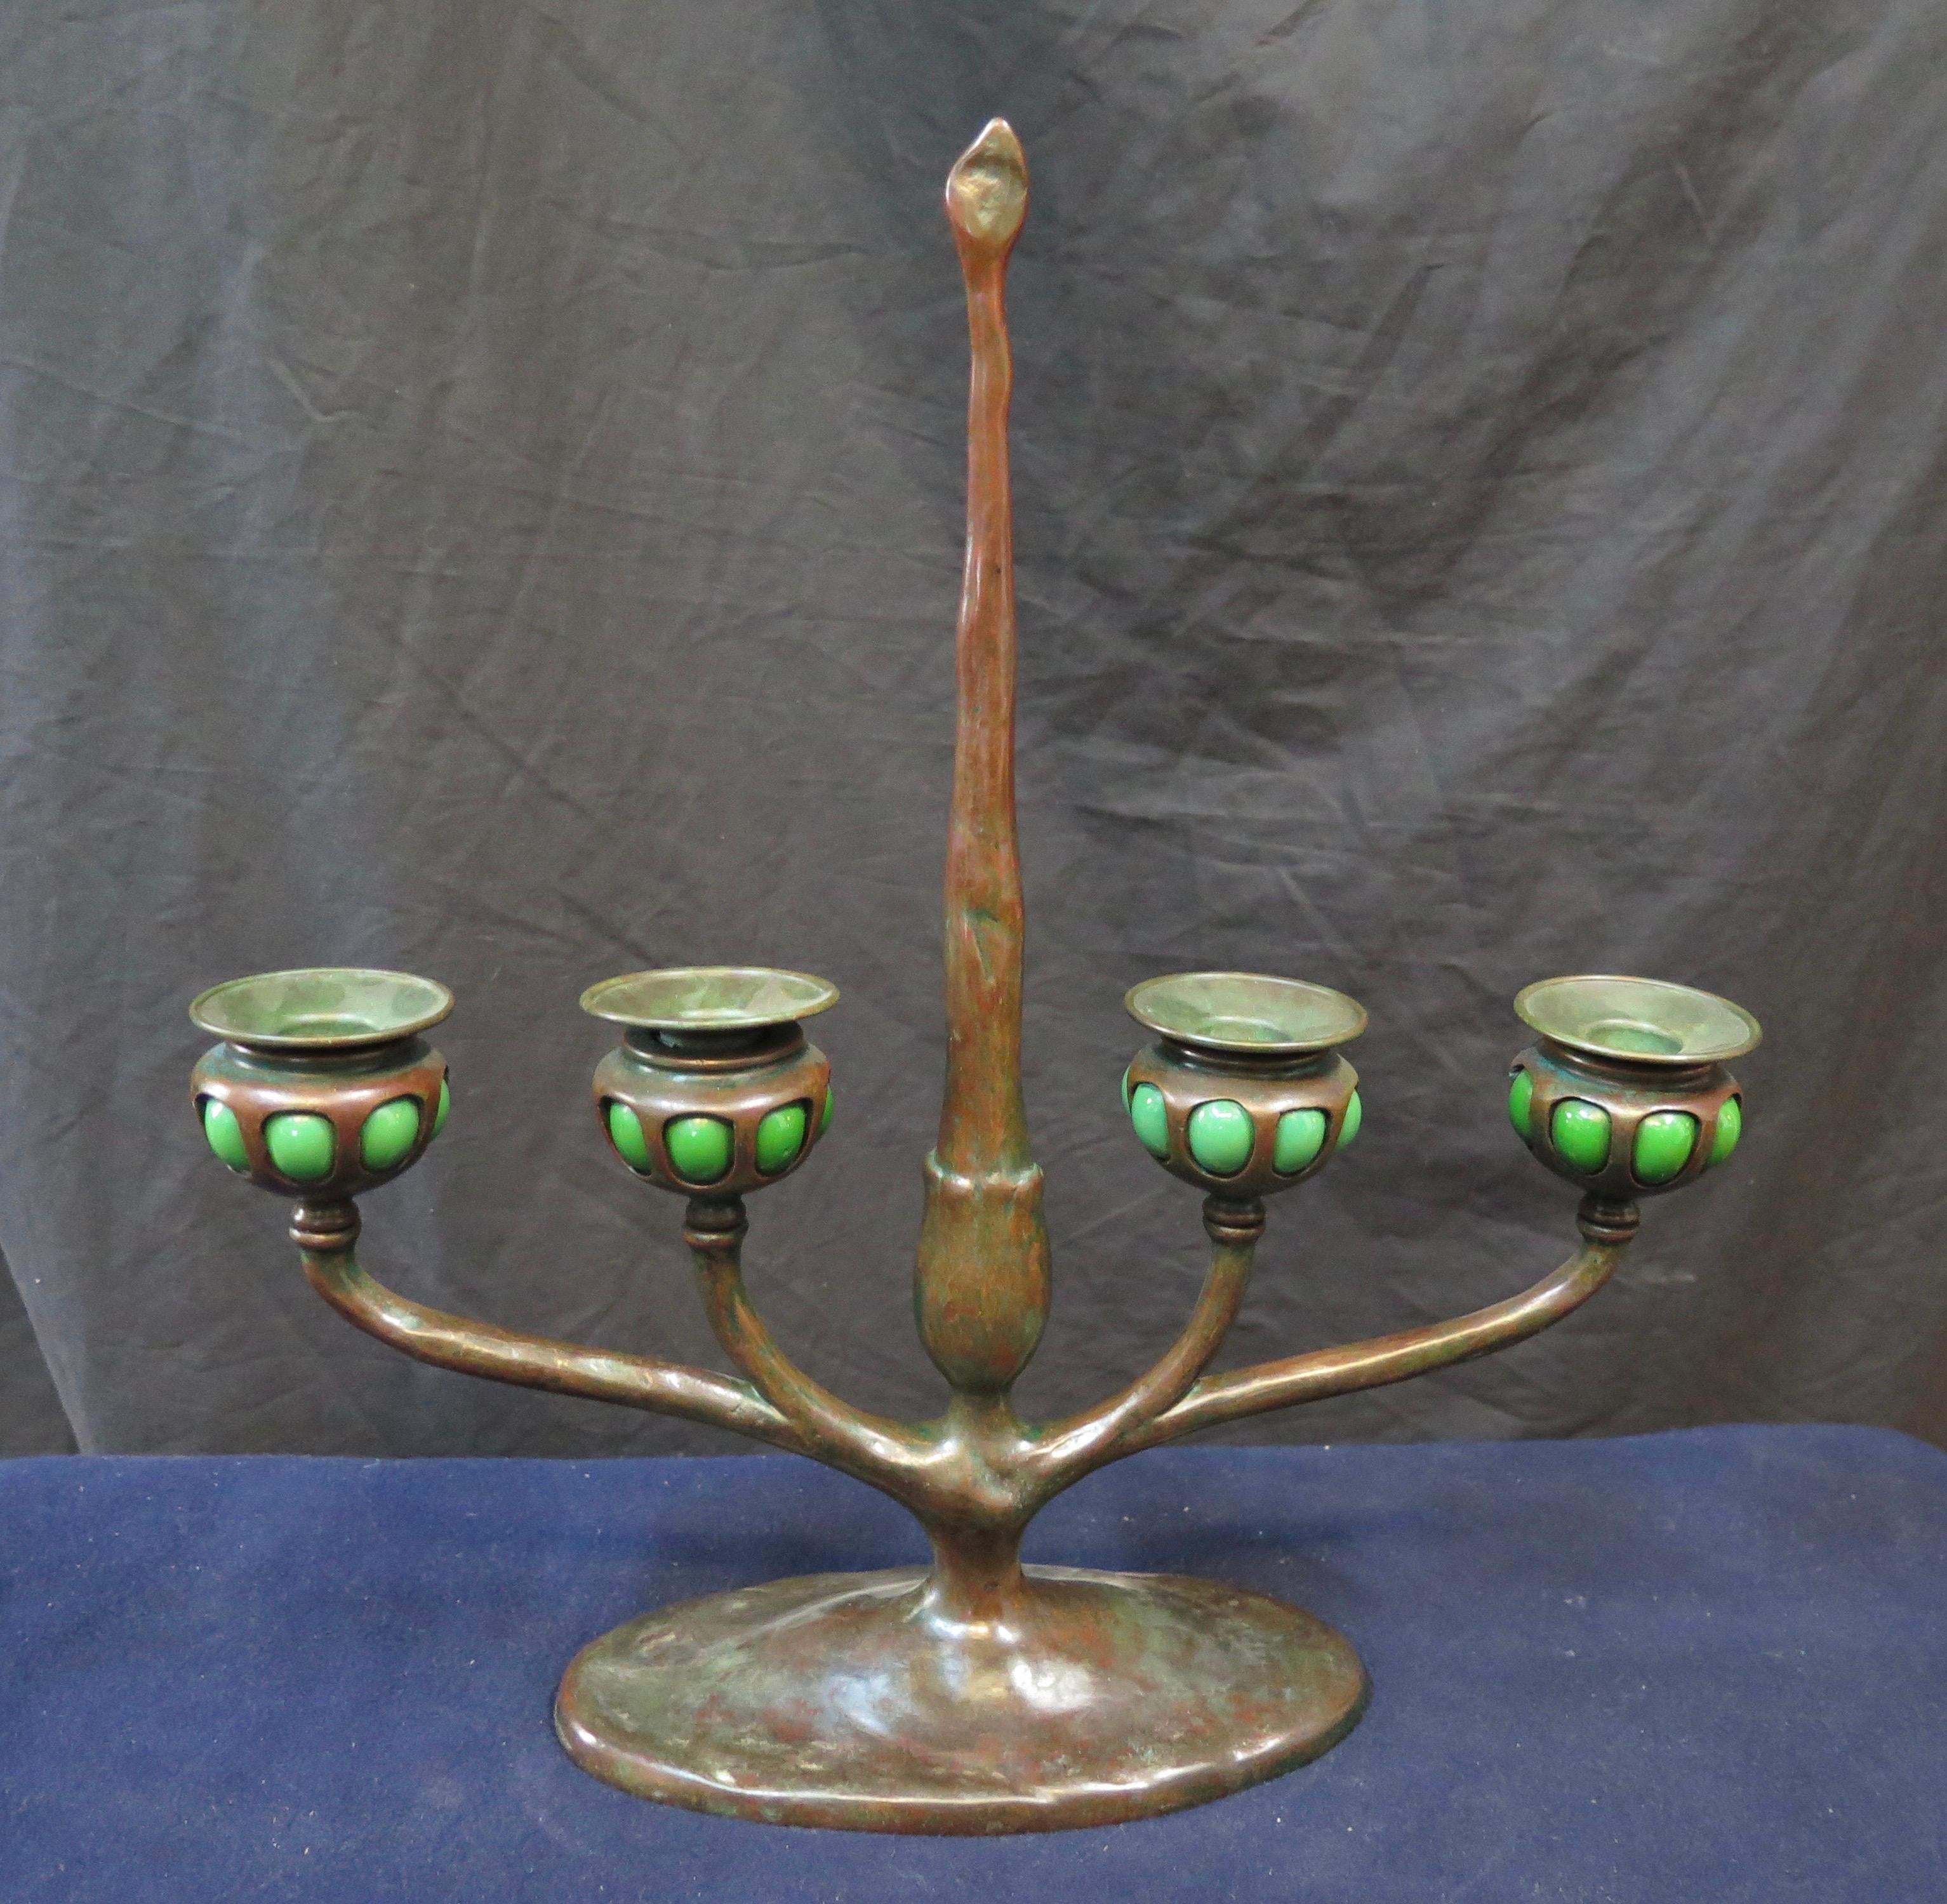 Patinated Tiffany Studios Four Place Candelabra with Blown Out Green Glass Candleholders